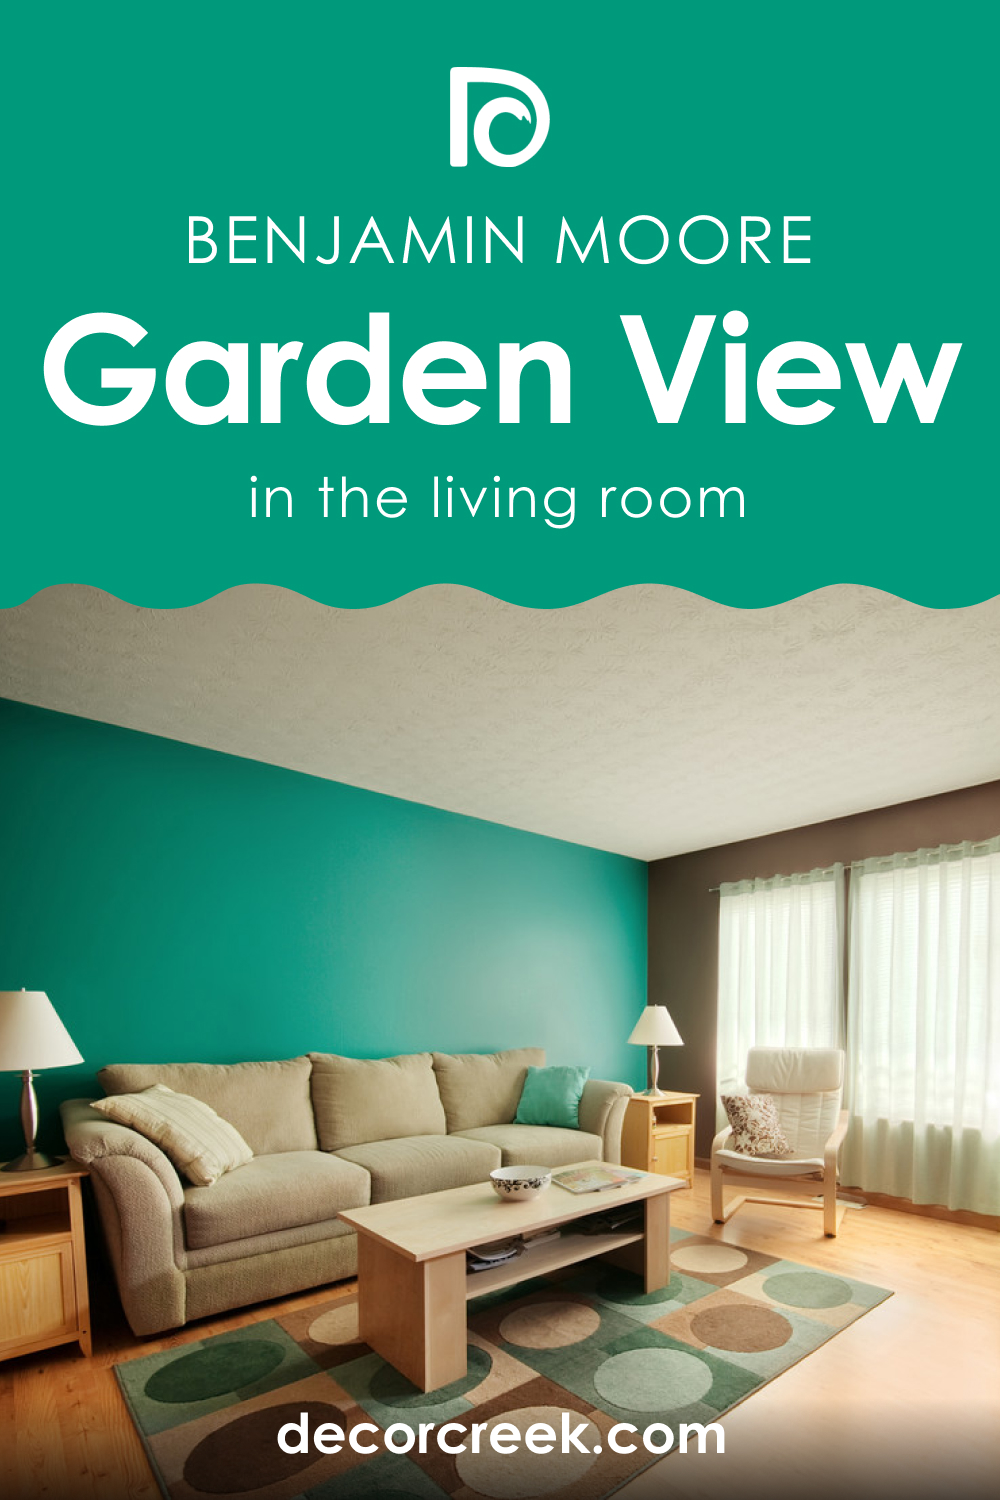 How to Use Garden View 616 in the Living Room?